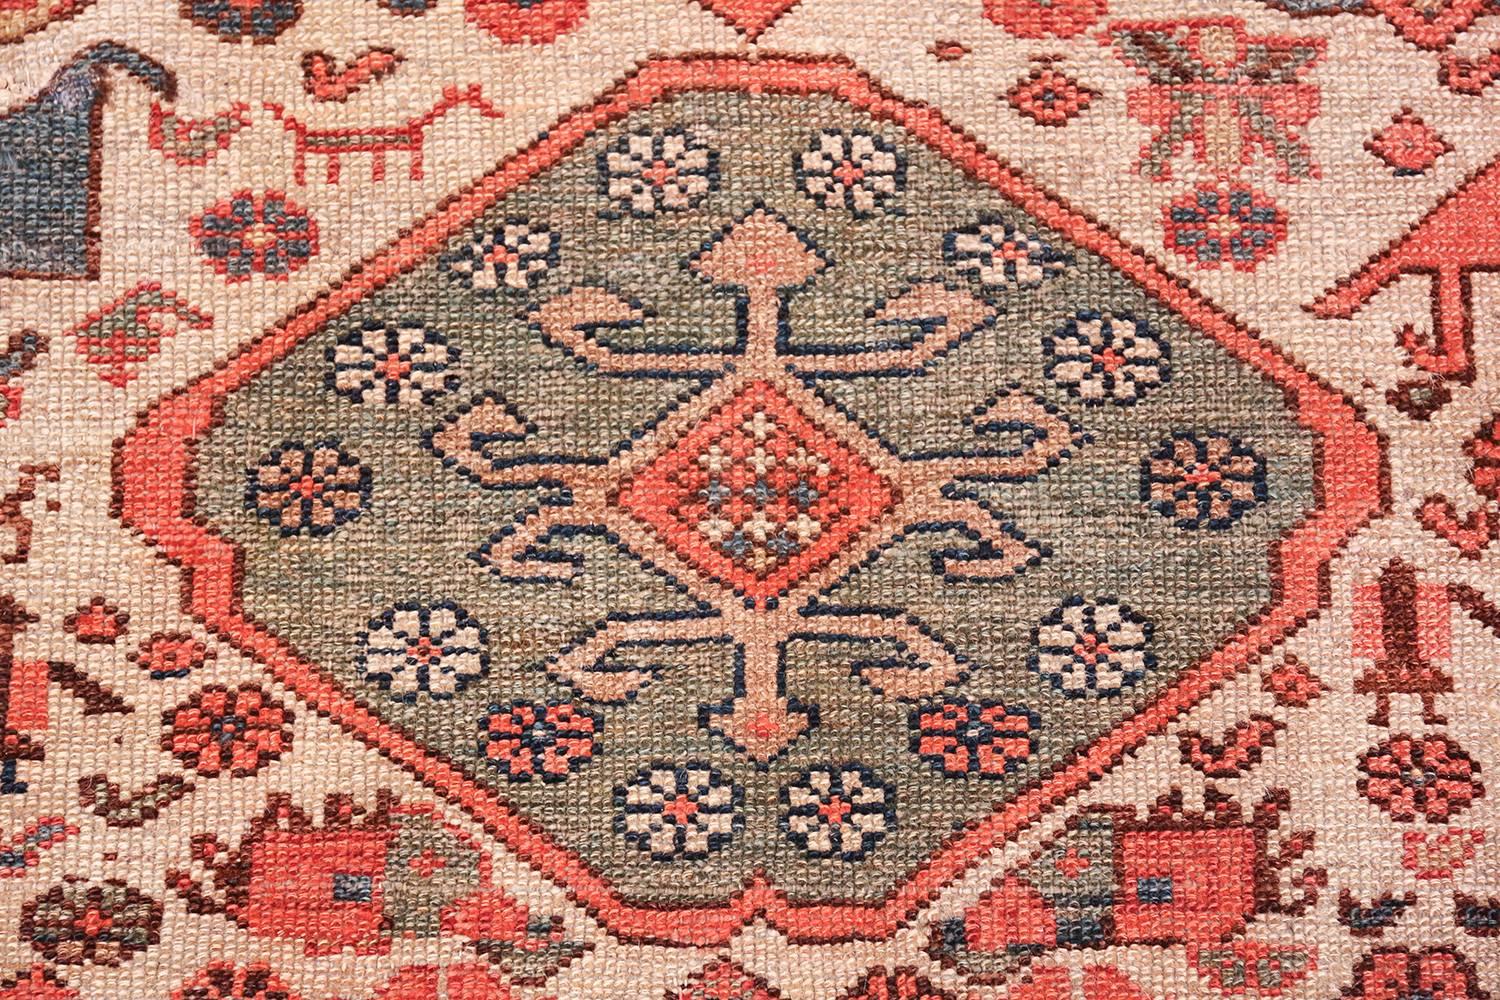 Magnificent Ivory Background Tribal Antique Persian Bakshaish Rug,  Country of Origin / Rug Type: Persian Rug,  Circa Date: Late 19th Century – With an unforgettable and intricate tribal rug design, this breathtaking ivory background antique Persian